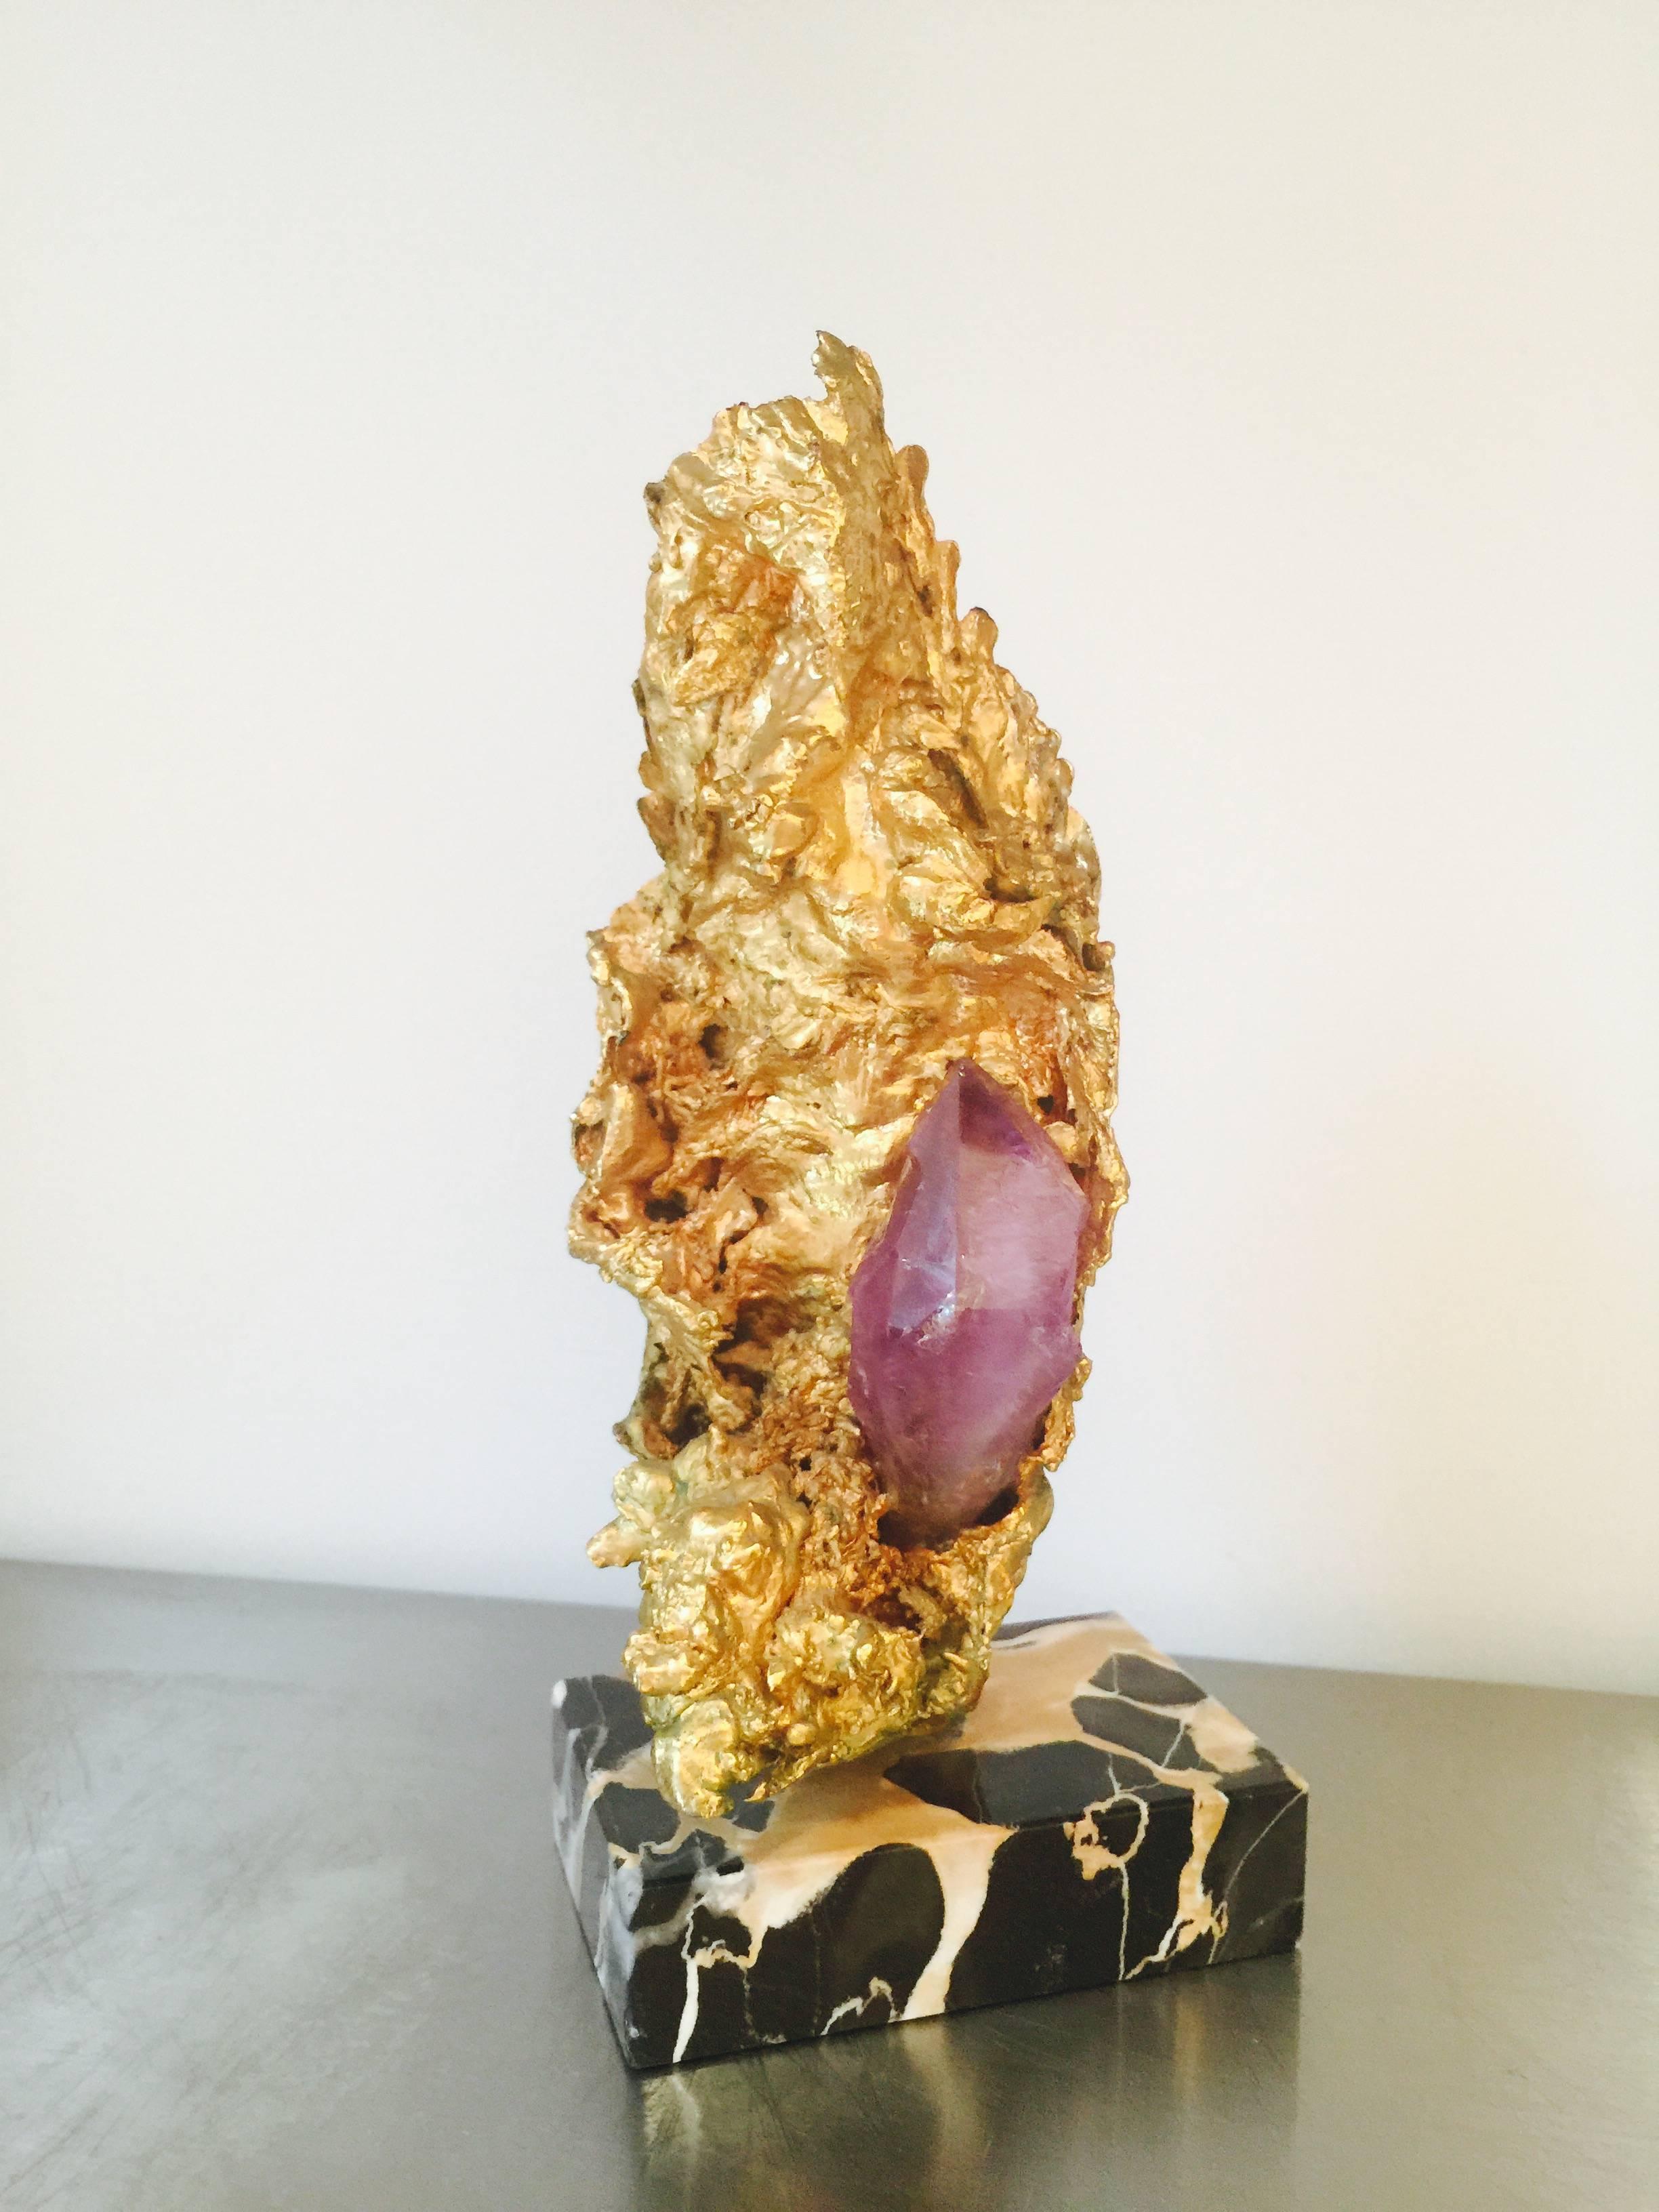 A beautiful mixed material sculpture in the style of Mjacques Duval Brasseur.
Great use of the gilt metal in the Brutalist style.
The inset amethyst quartz adds elegance and dimension to this piece.
Mounted on a marble base.
 